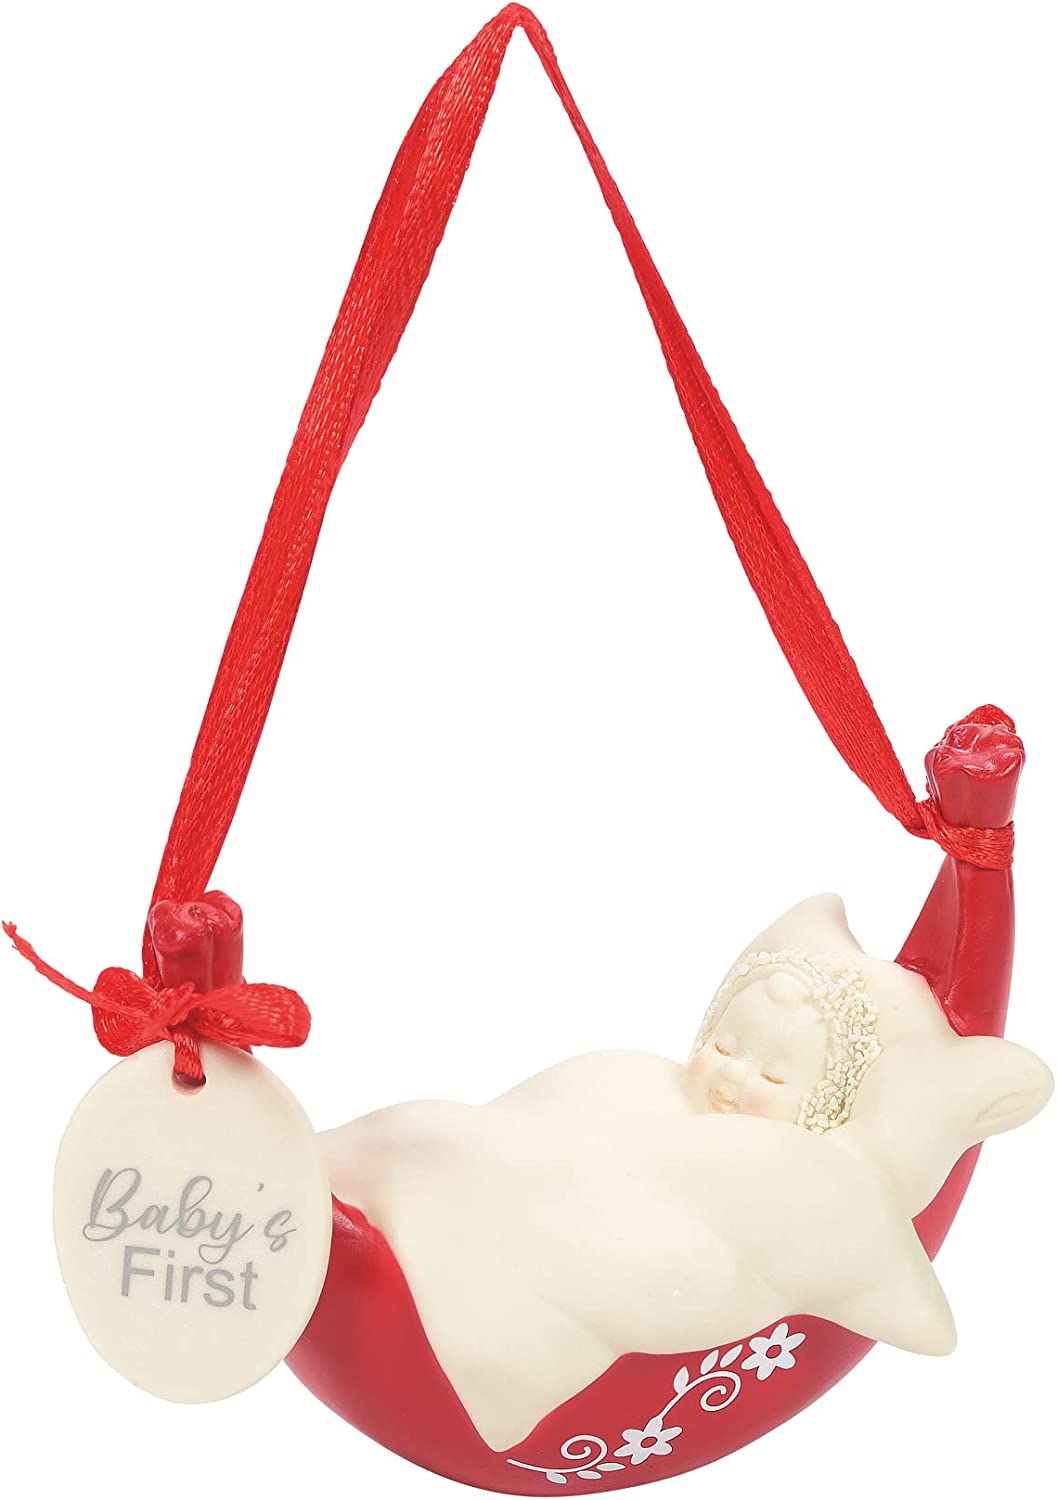 Department 56 Snowbabies Rock-a-Bye Baby's 1st Christmas Hanging Ornament 2022